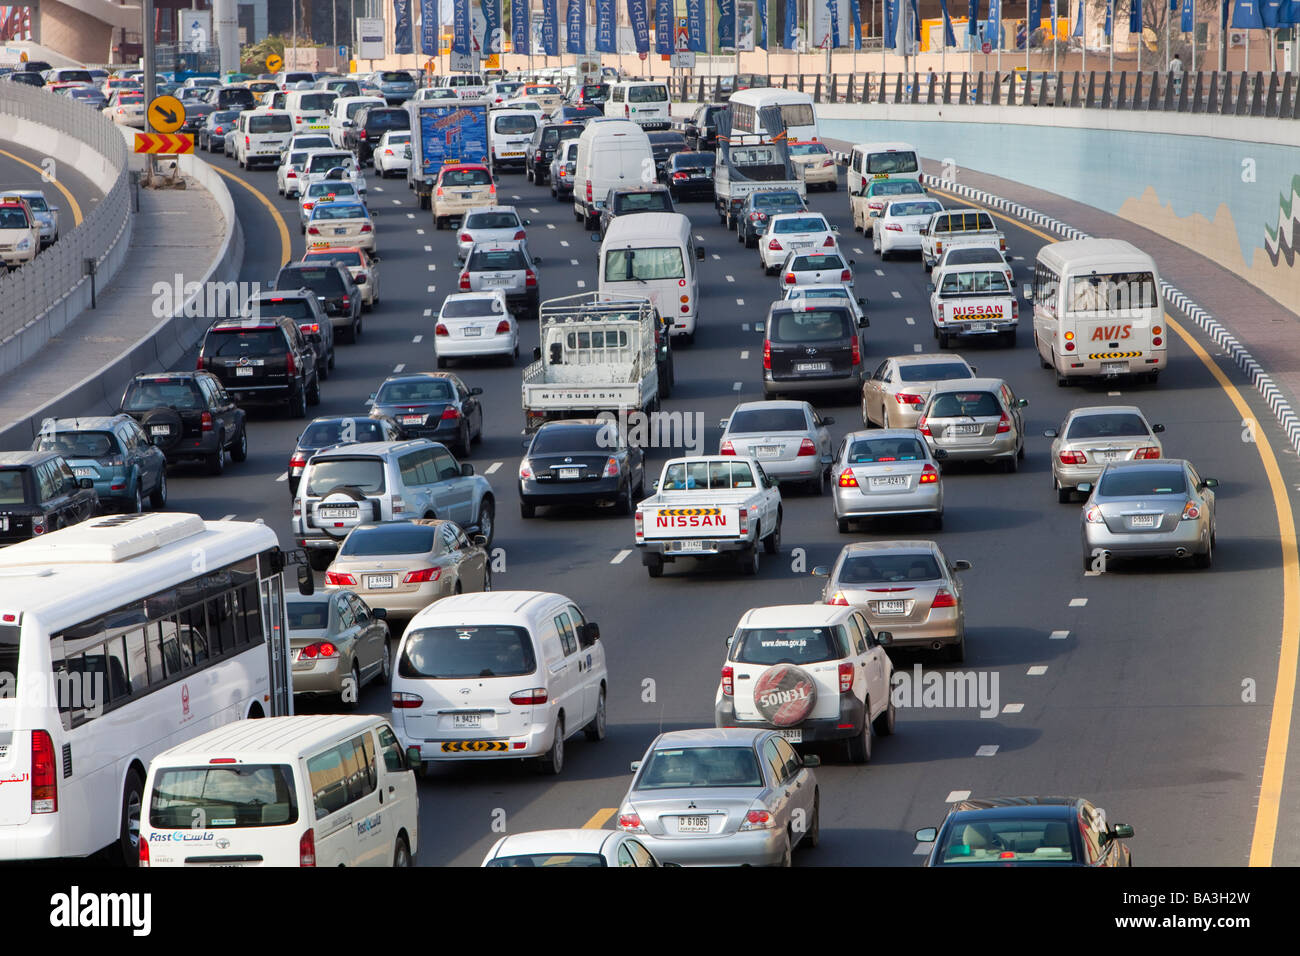 Cars in Dubai city in the Middle East Stock Photo